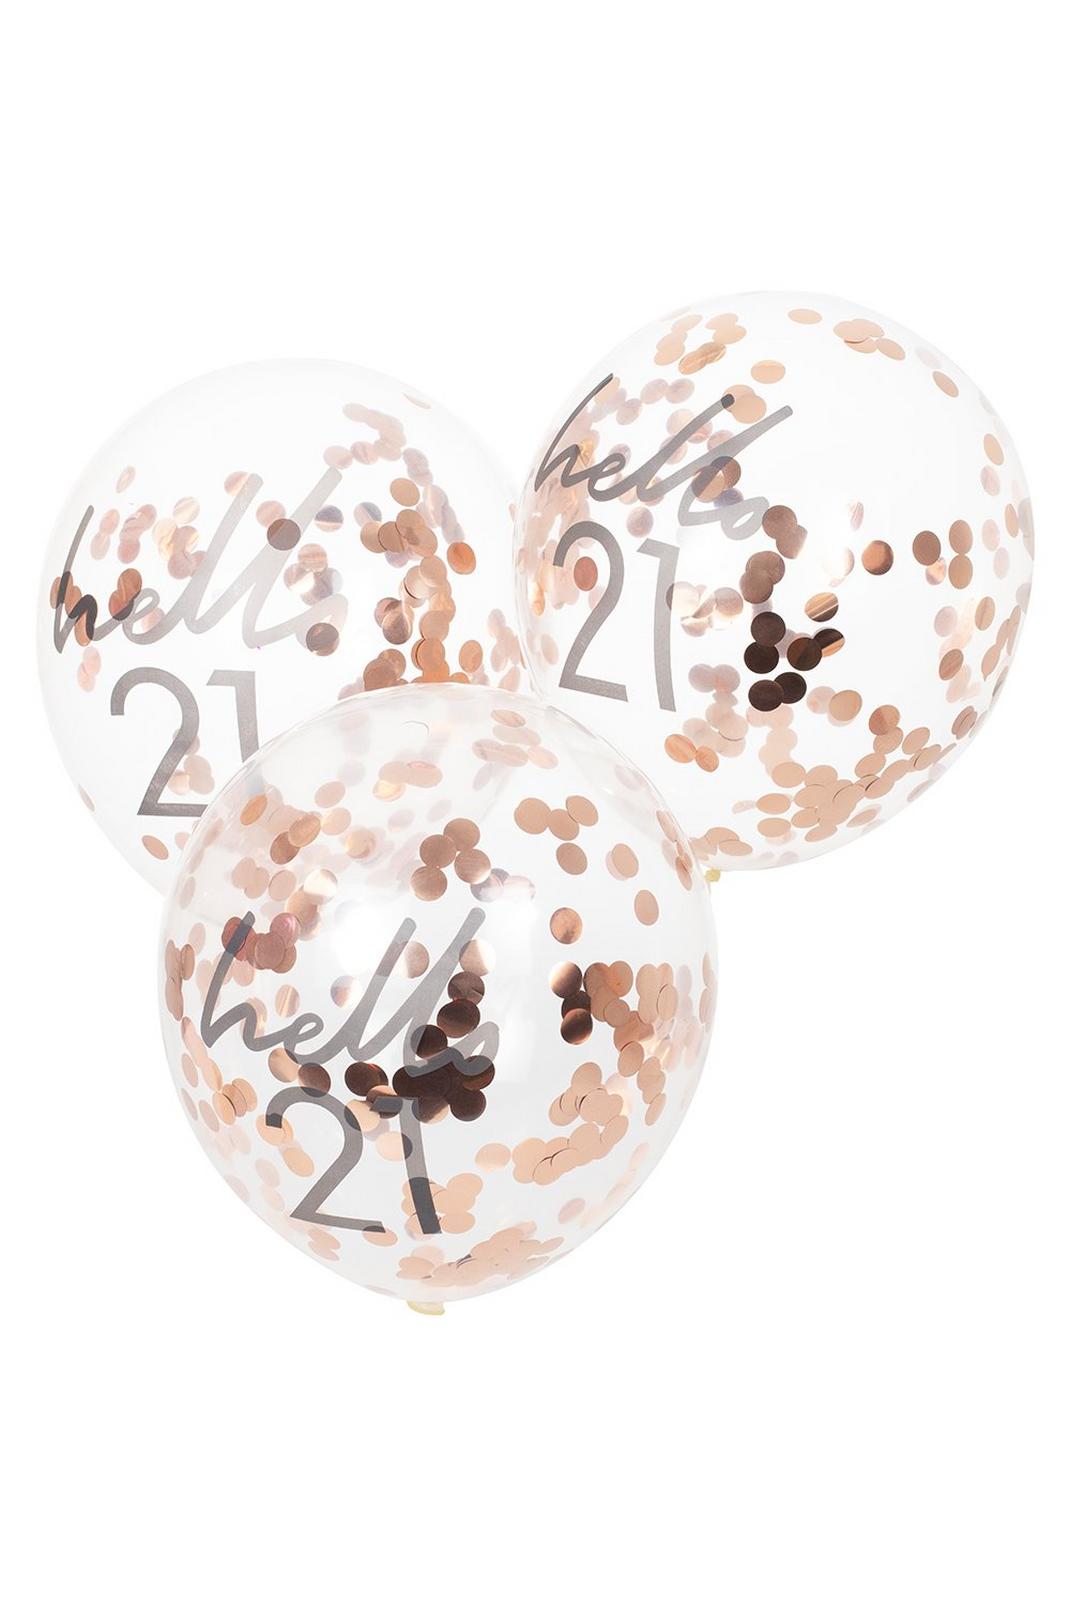 173 Ginger Ray Hello 21 Confetti Balloon image number 1